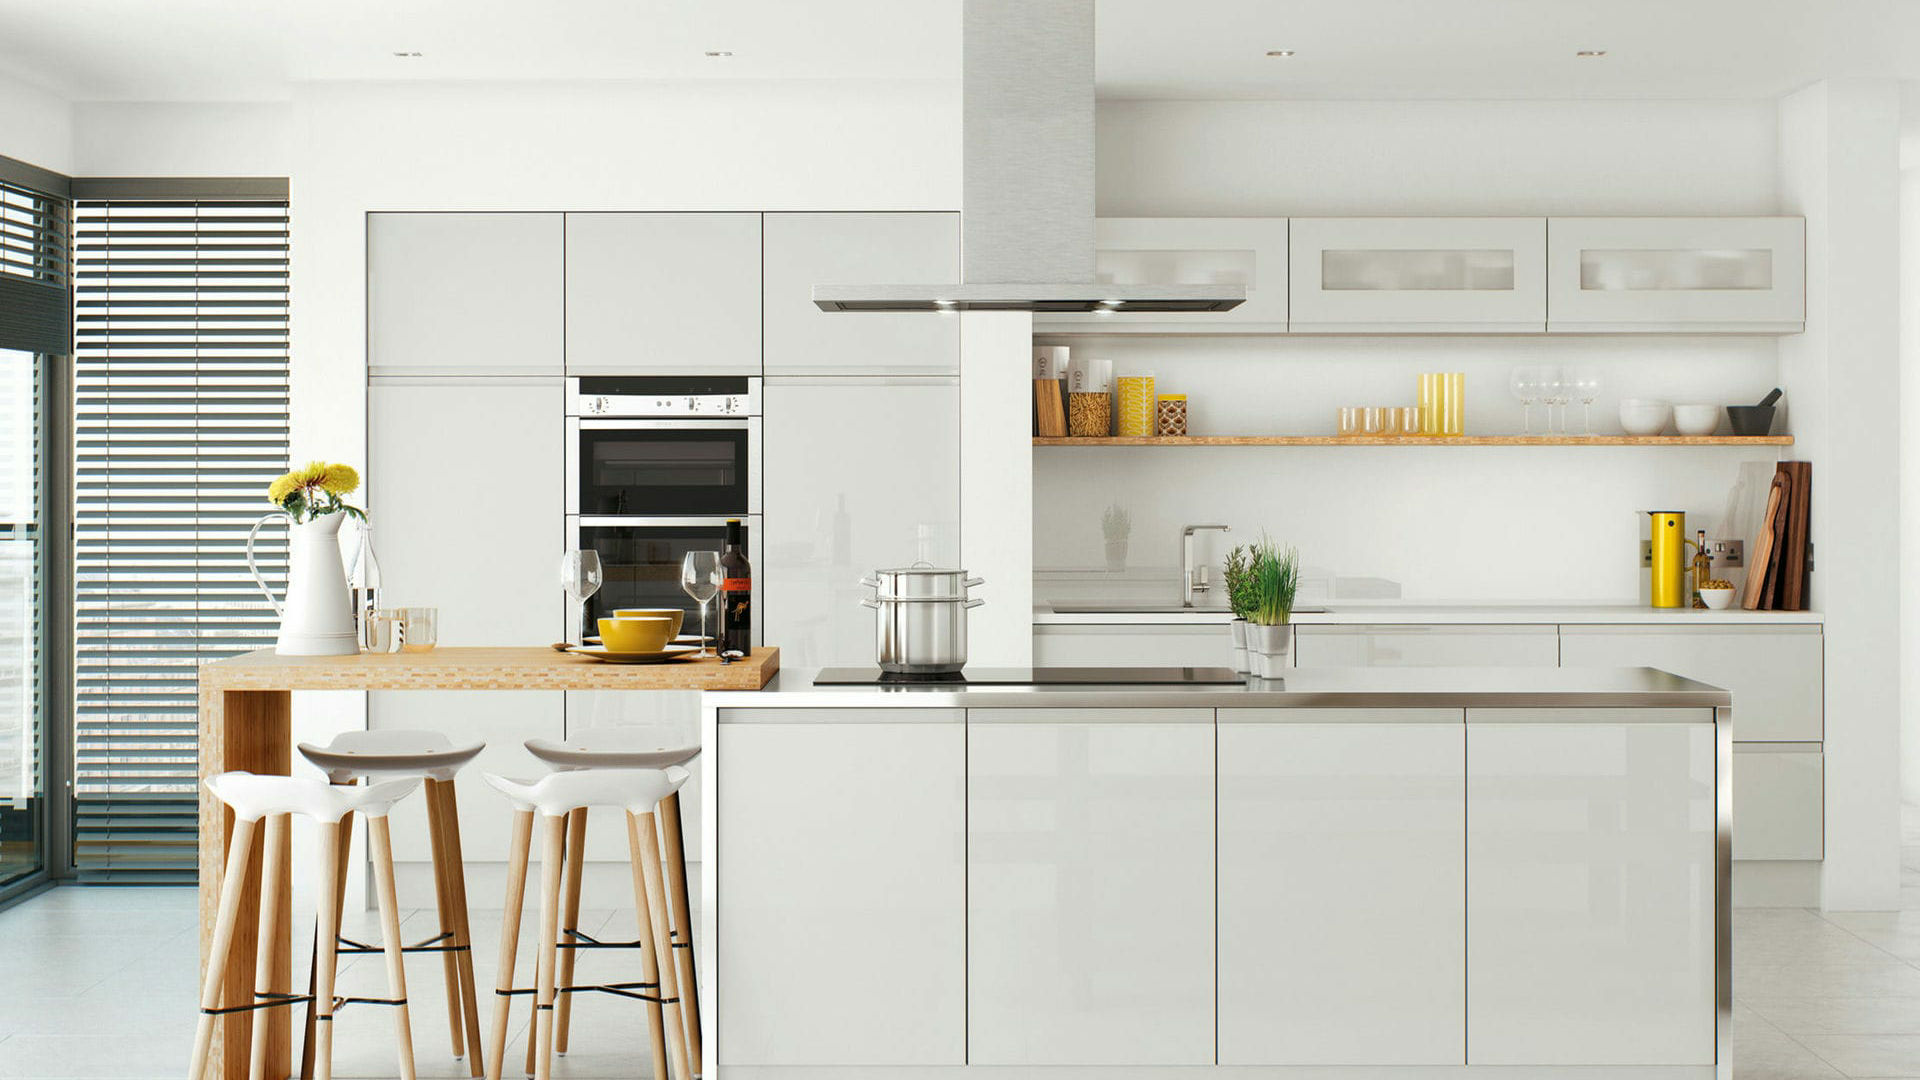 Handleless high gloss light grey kitchens exuding minimalist chic with seamless functionality